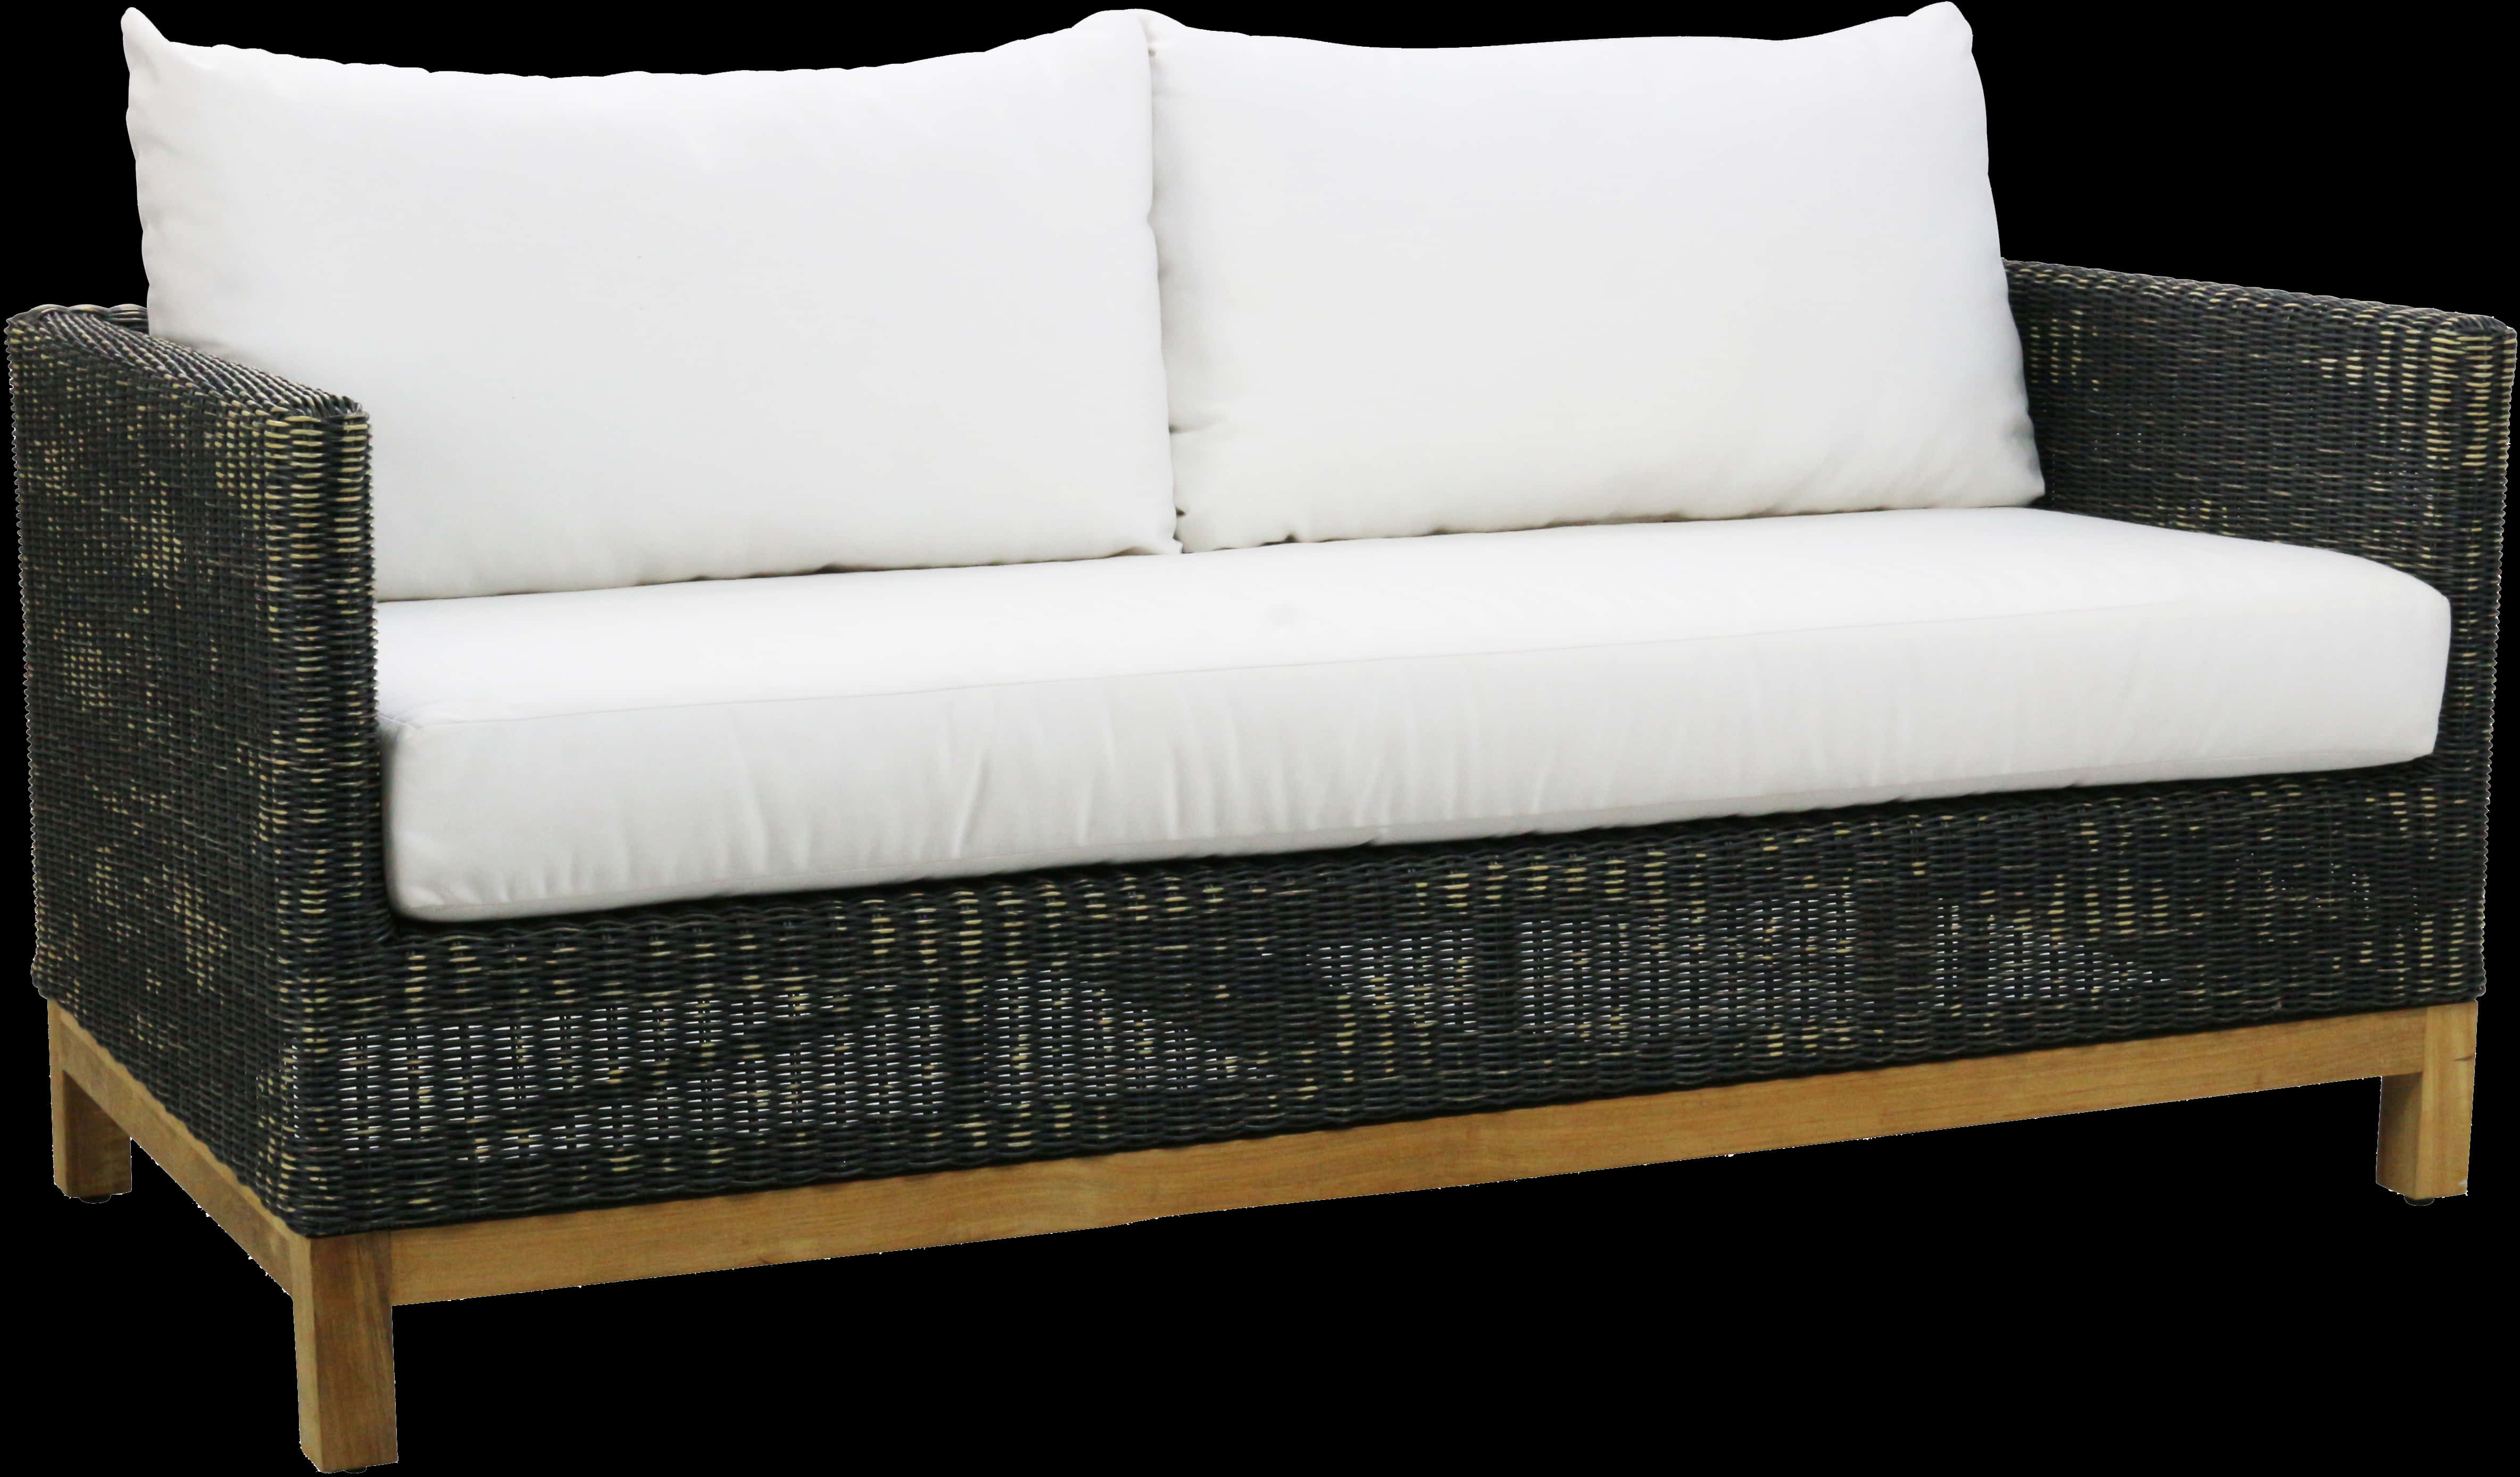 A White Couch With A Black Background